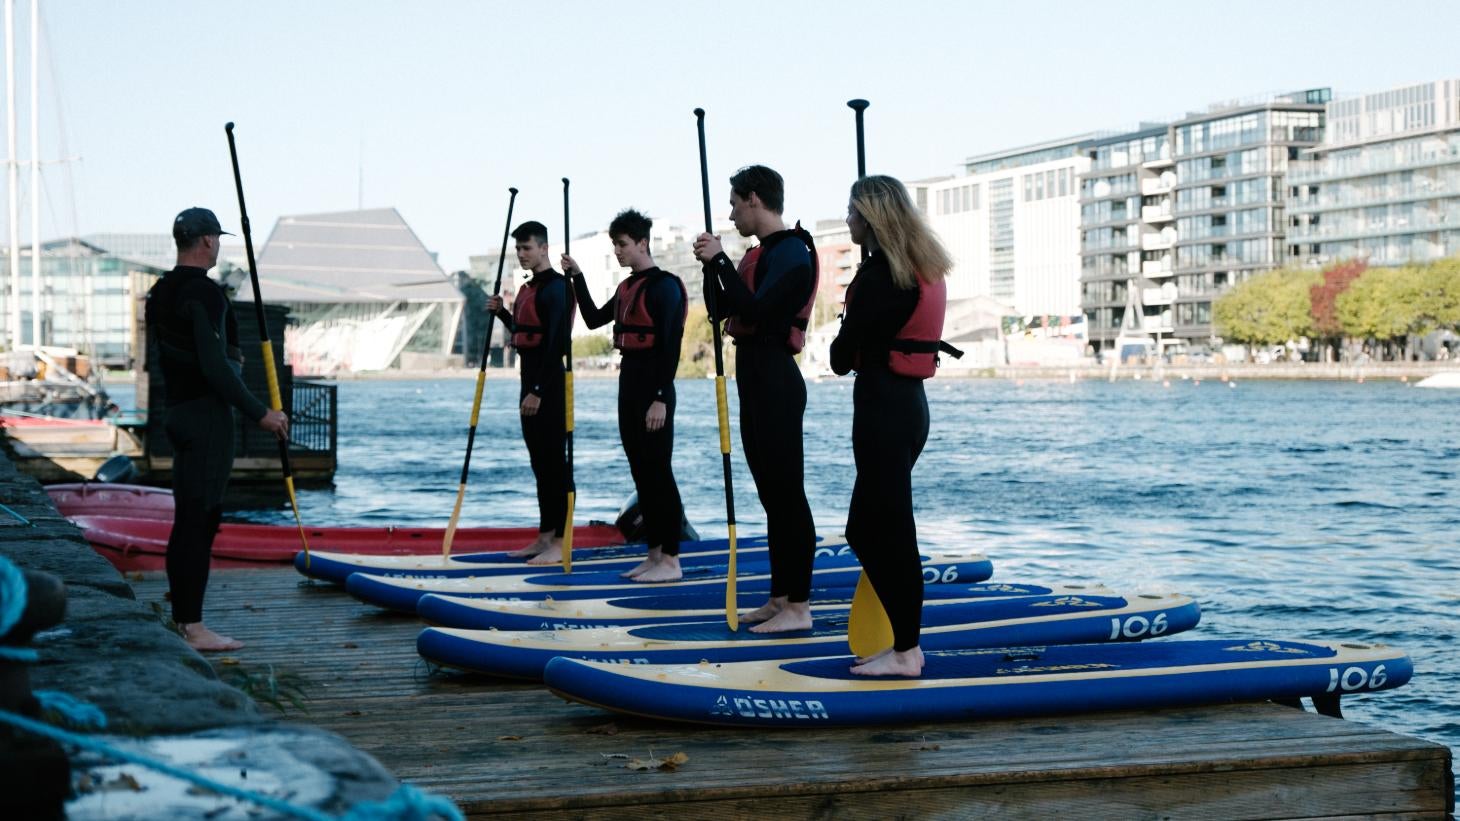 People standing on paddle boards at Grand Canal Dock in Dublin.